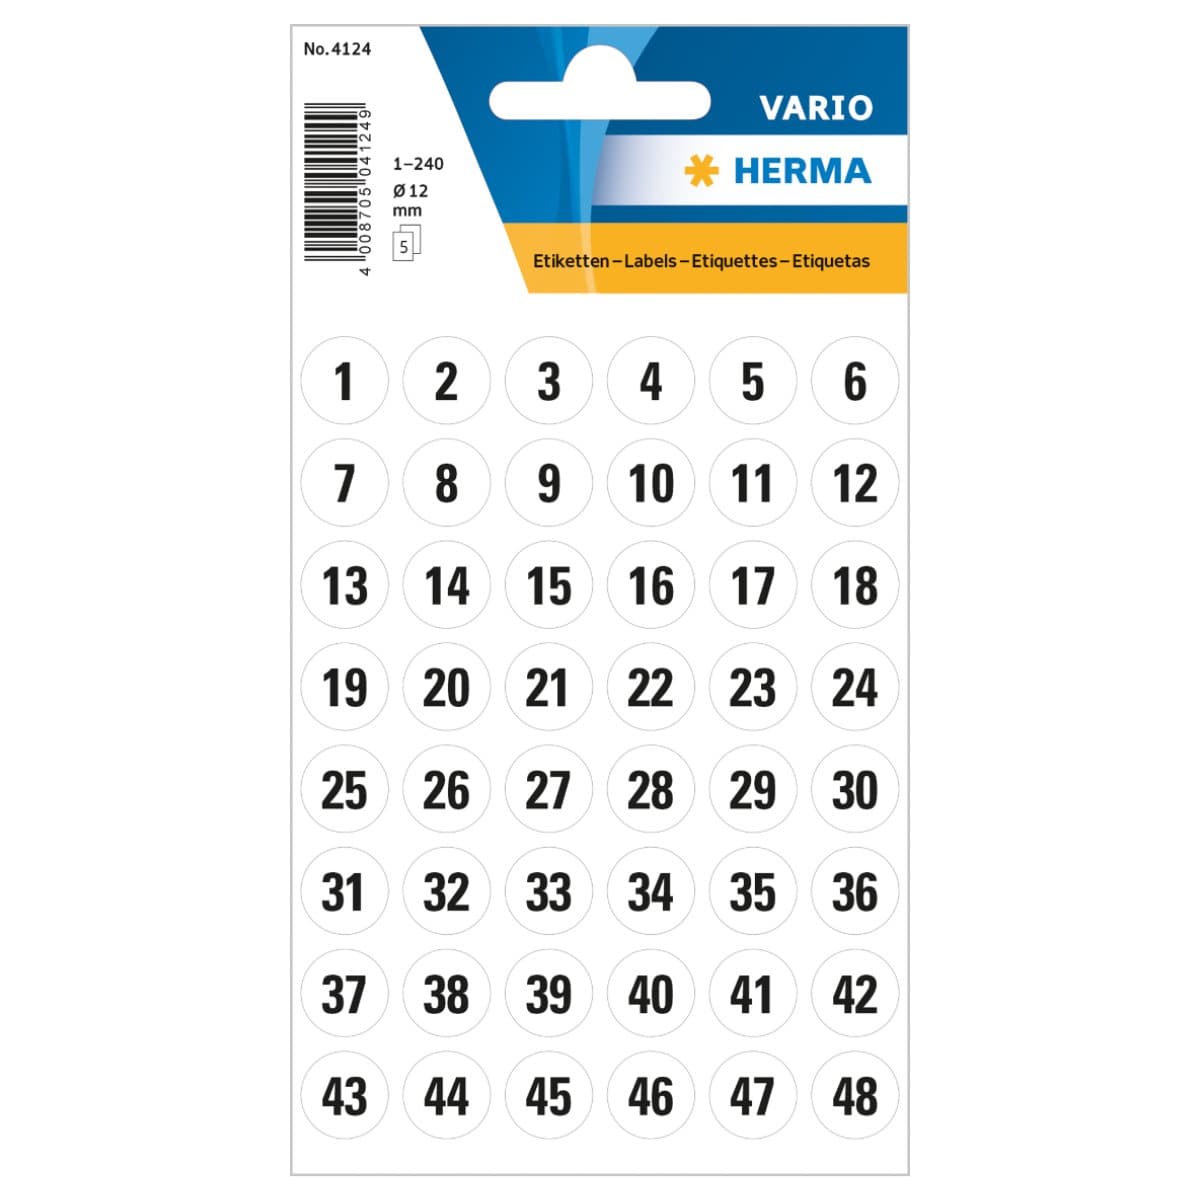 Herma Vario Sticker Dots with Numbers 1-240, 12mm, 1set/pack, Black on White